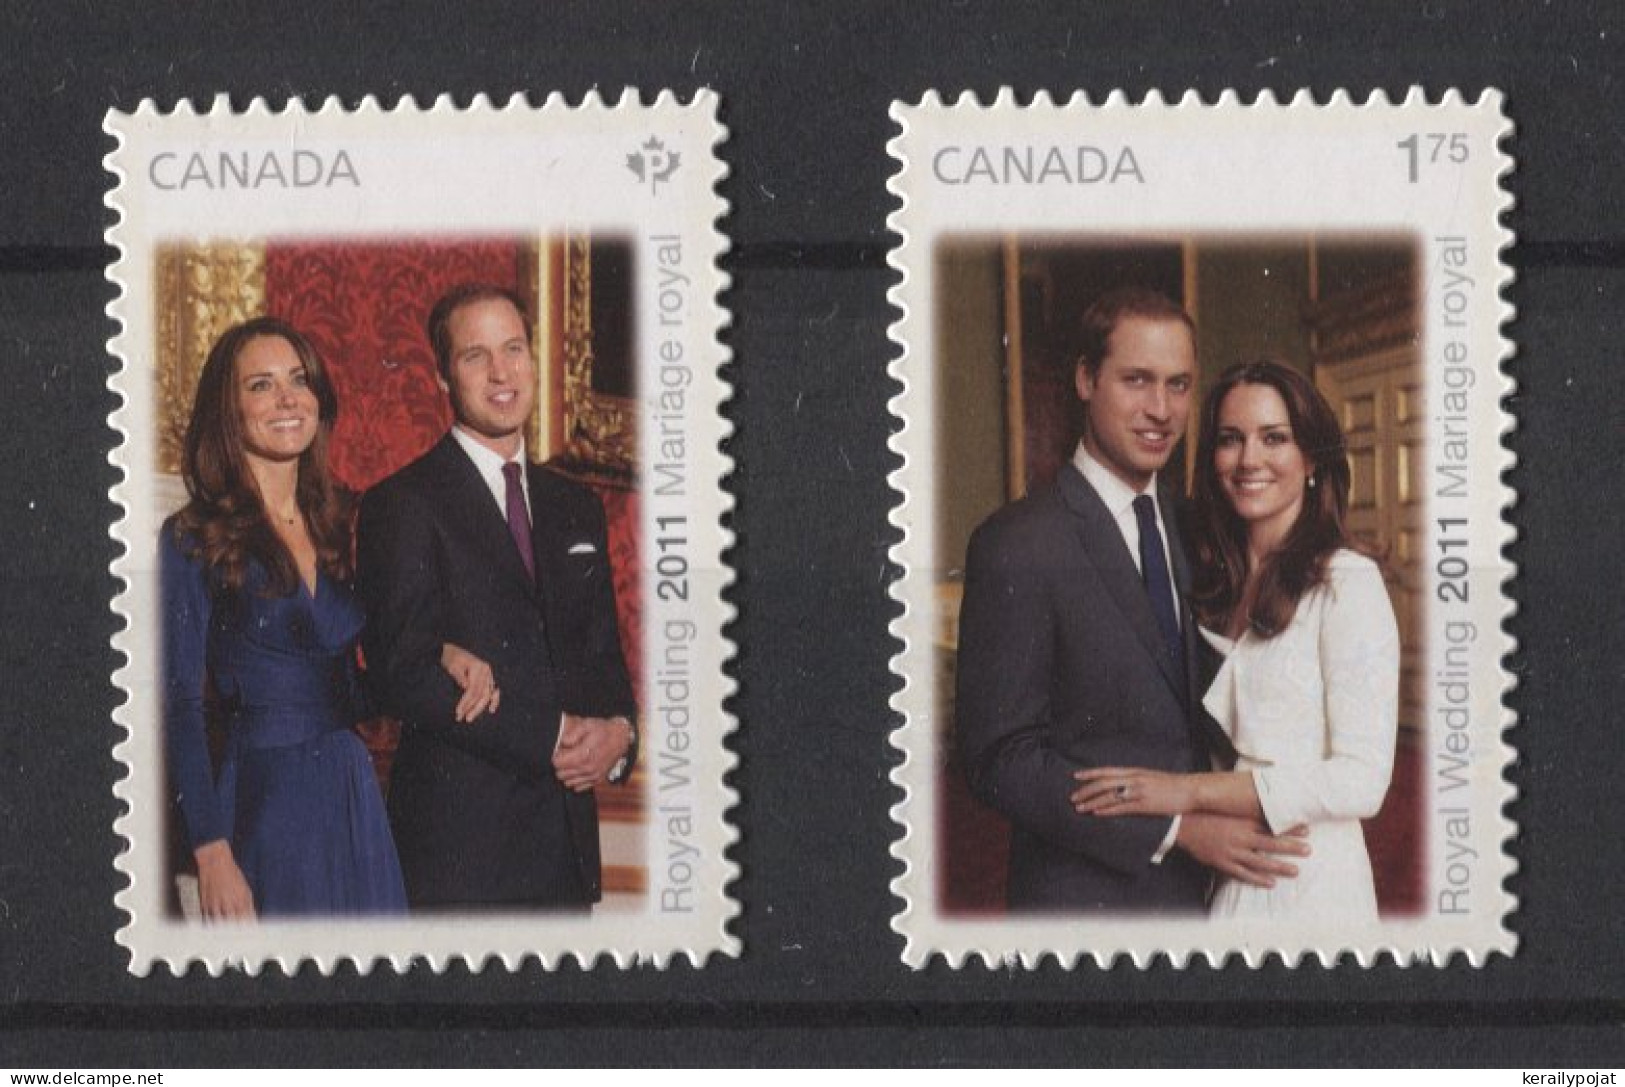 Canada - 2011 Prince William And Catherine Middleton Self-adhesive MNH__(TH-24855) - Unused Stamps